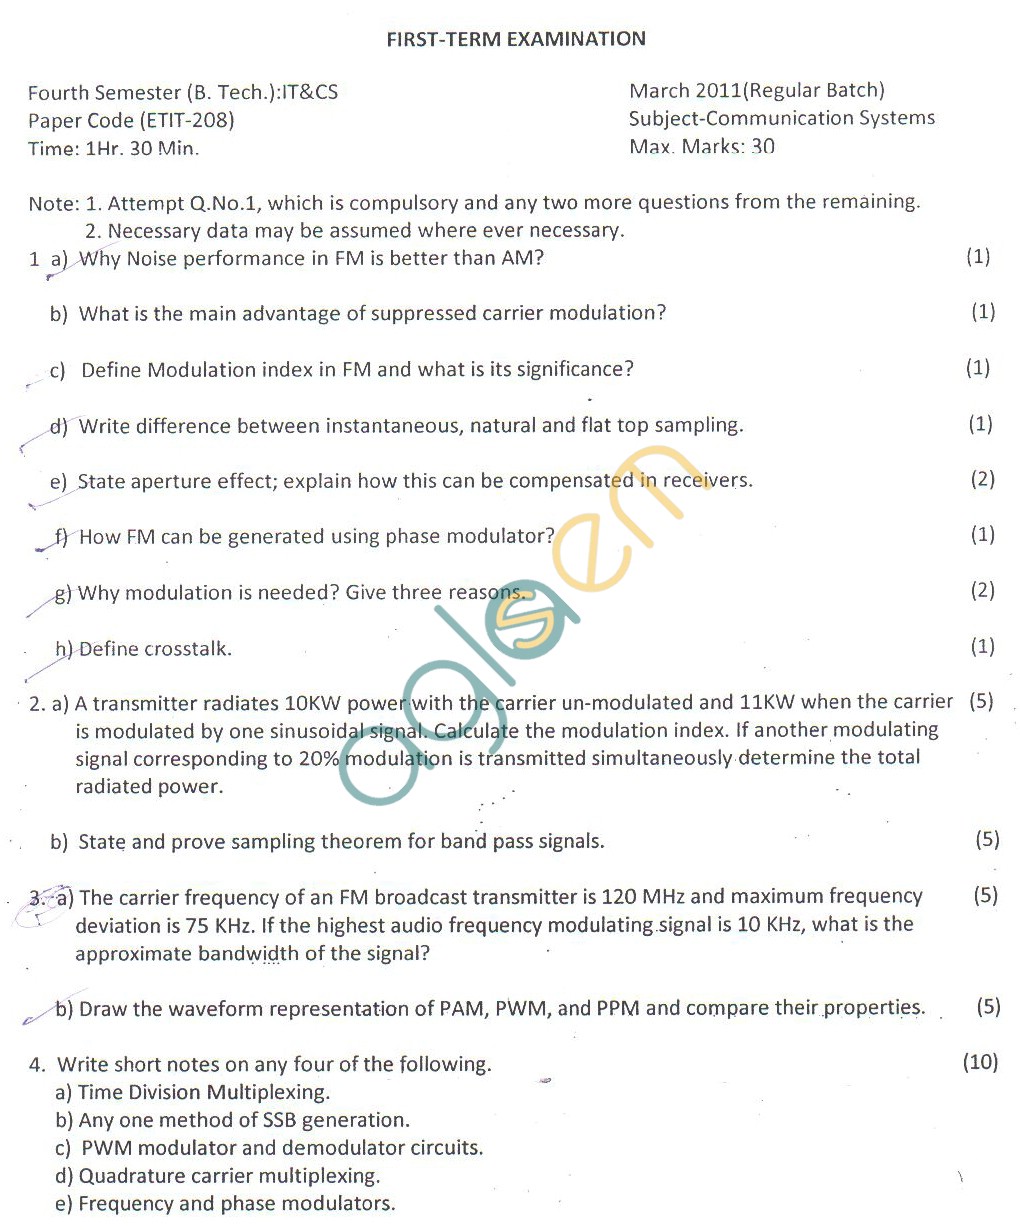 GGSIPU Question Papers Fourth Semester  First Term 2011  ETIT-208